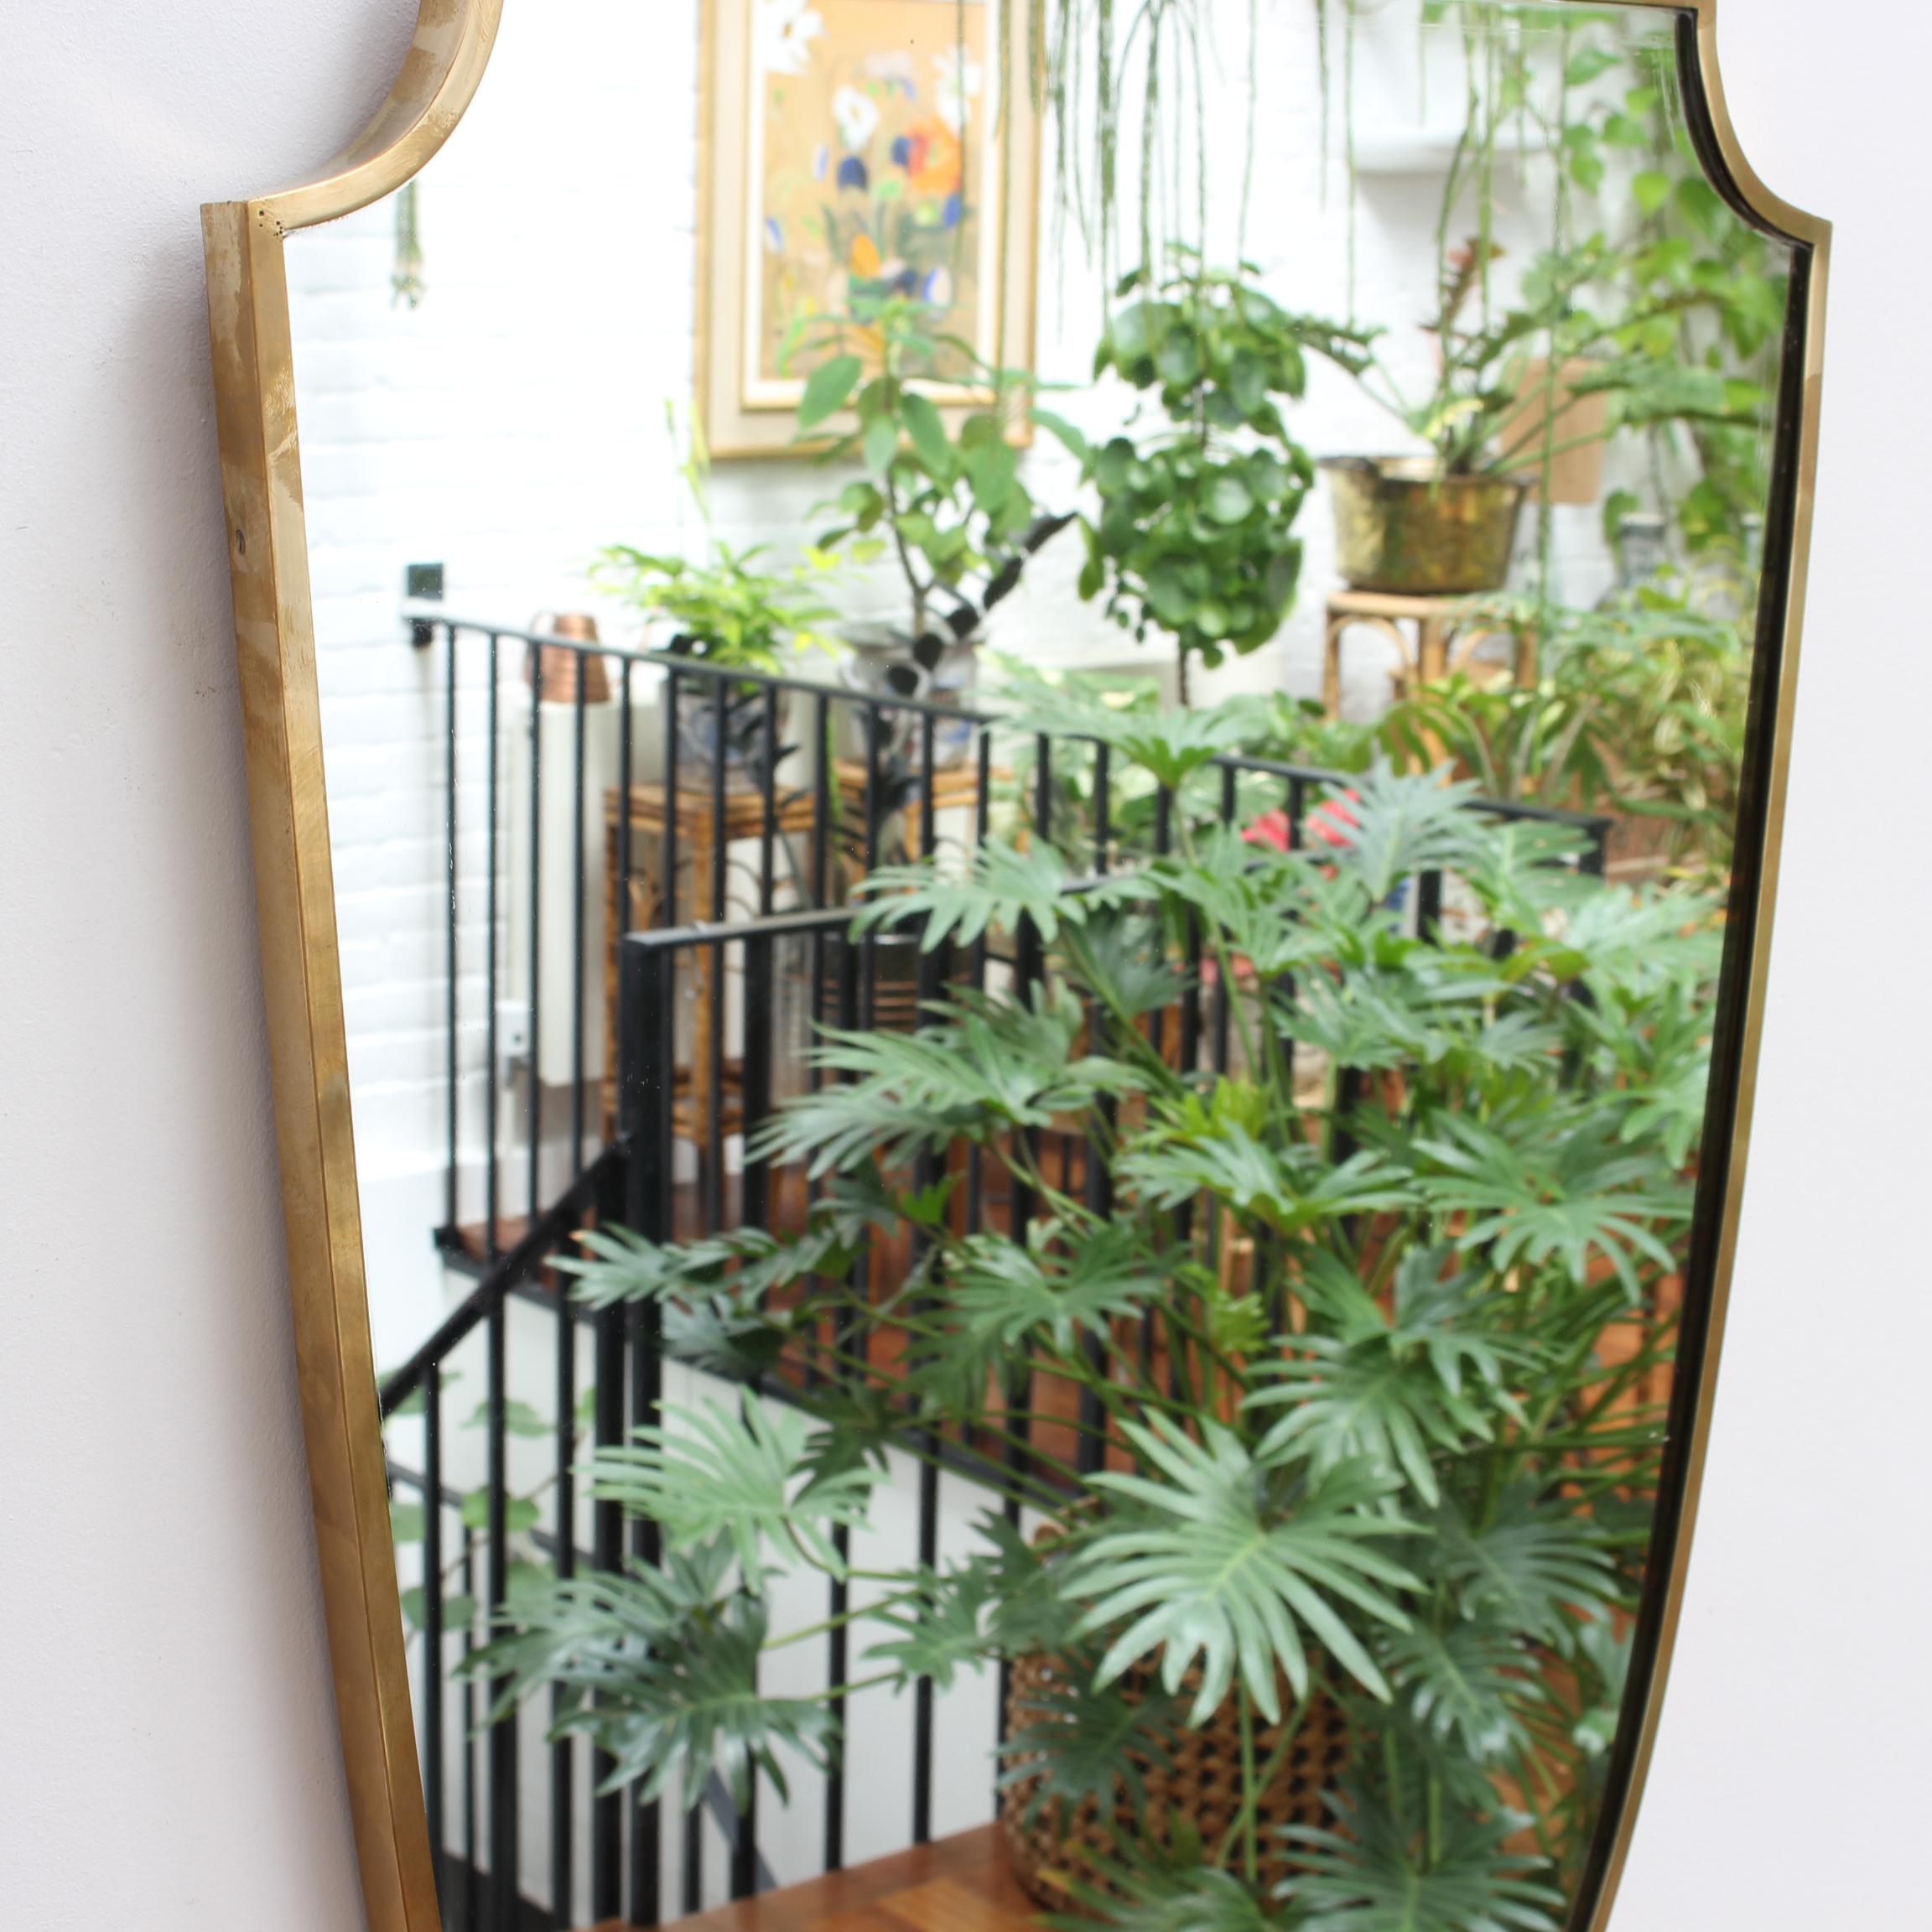 Mid-20th Century Midcentury Italian Crest-Shaped Wall Mirror with Brass Frame, 1950s, Large